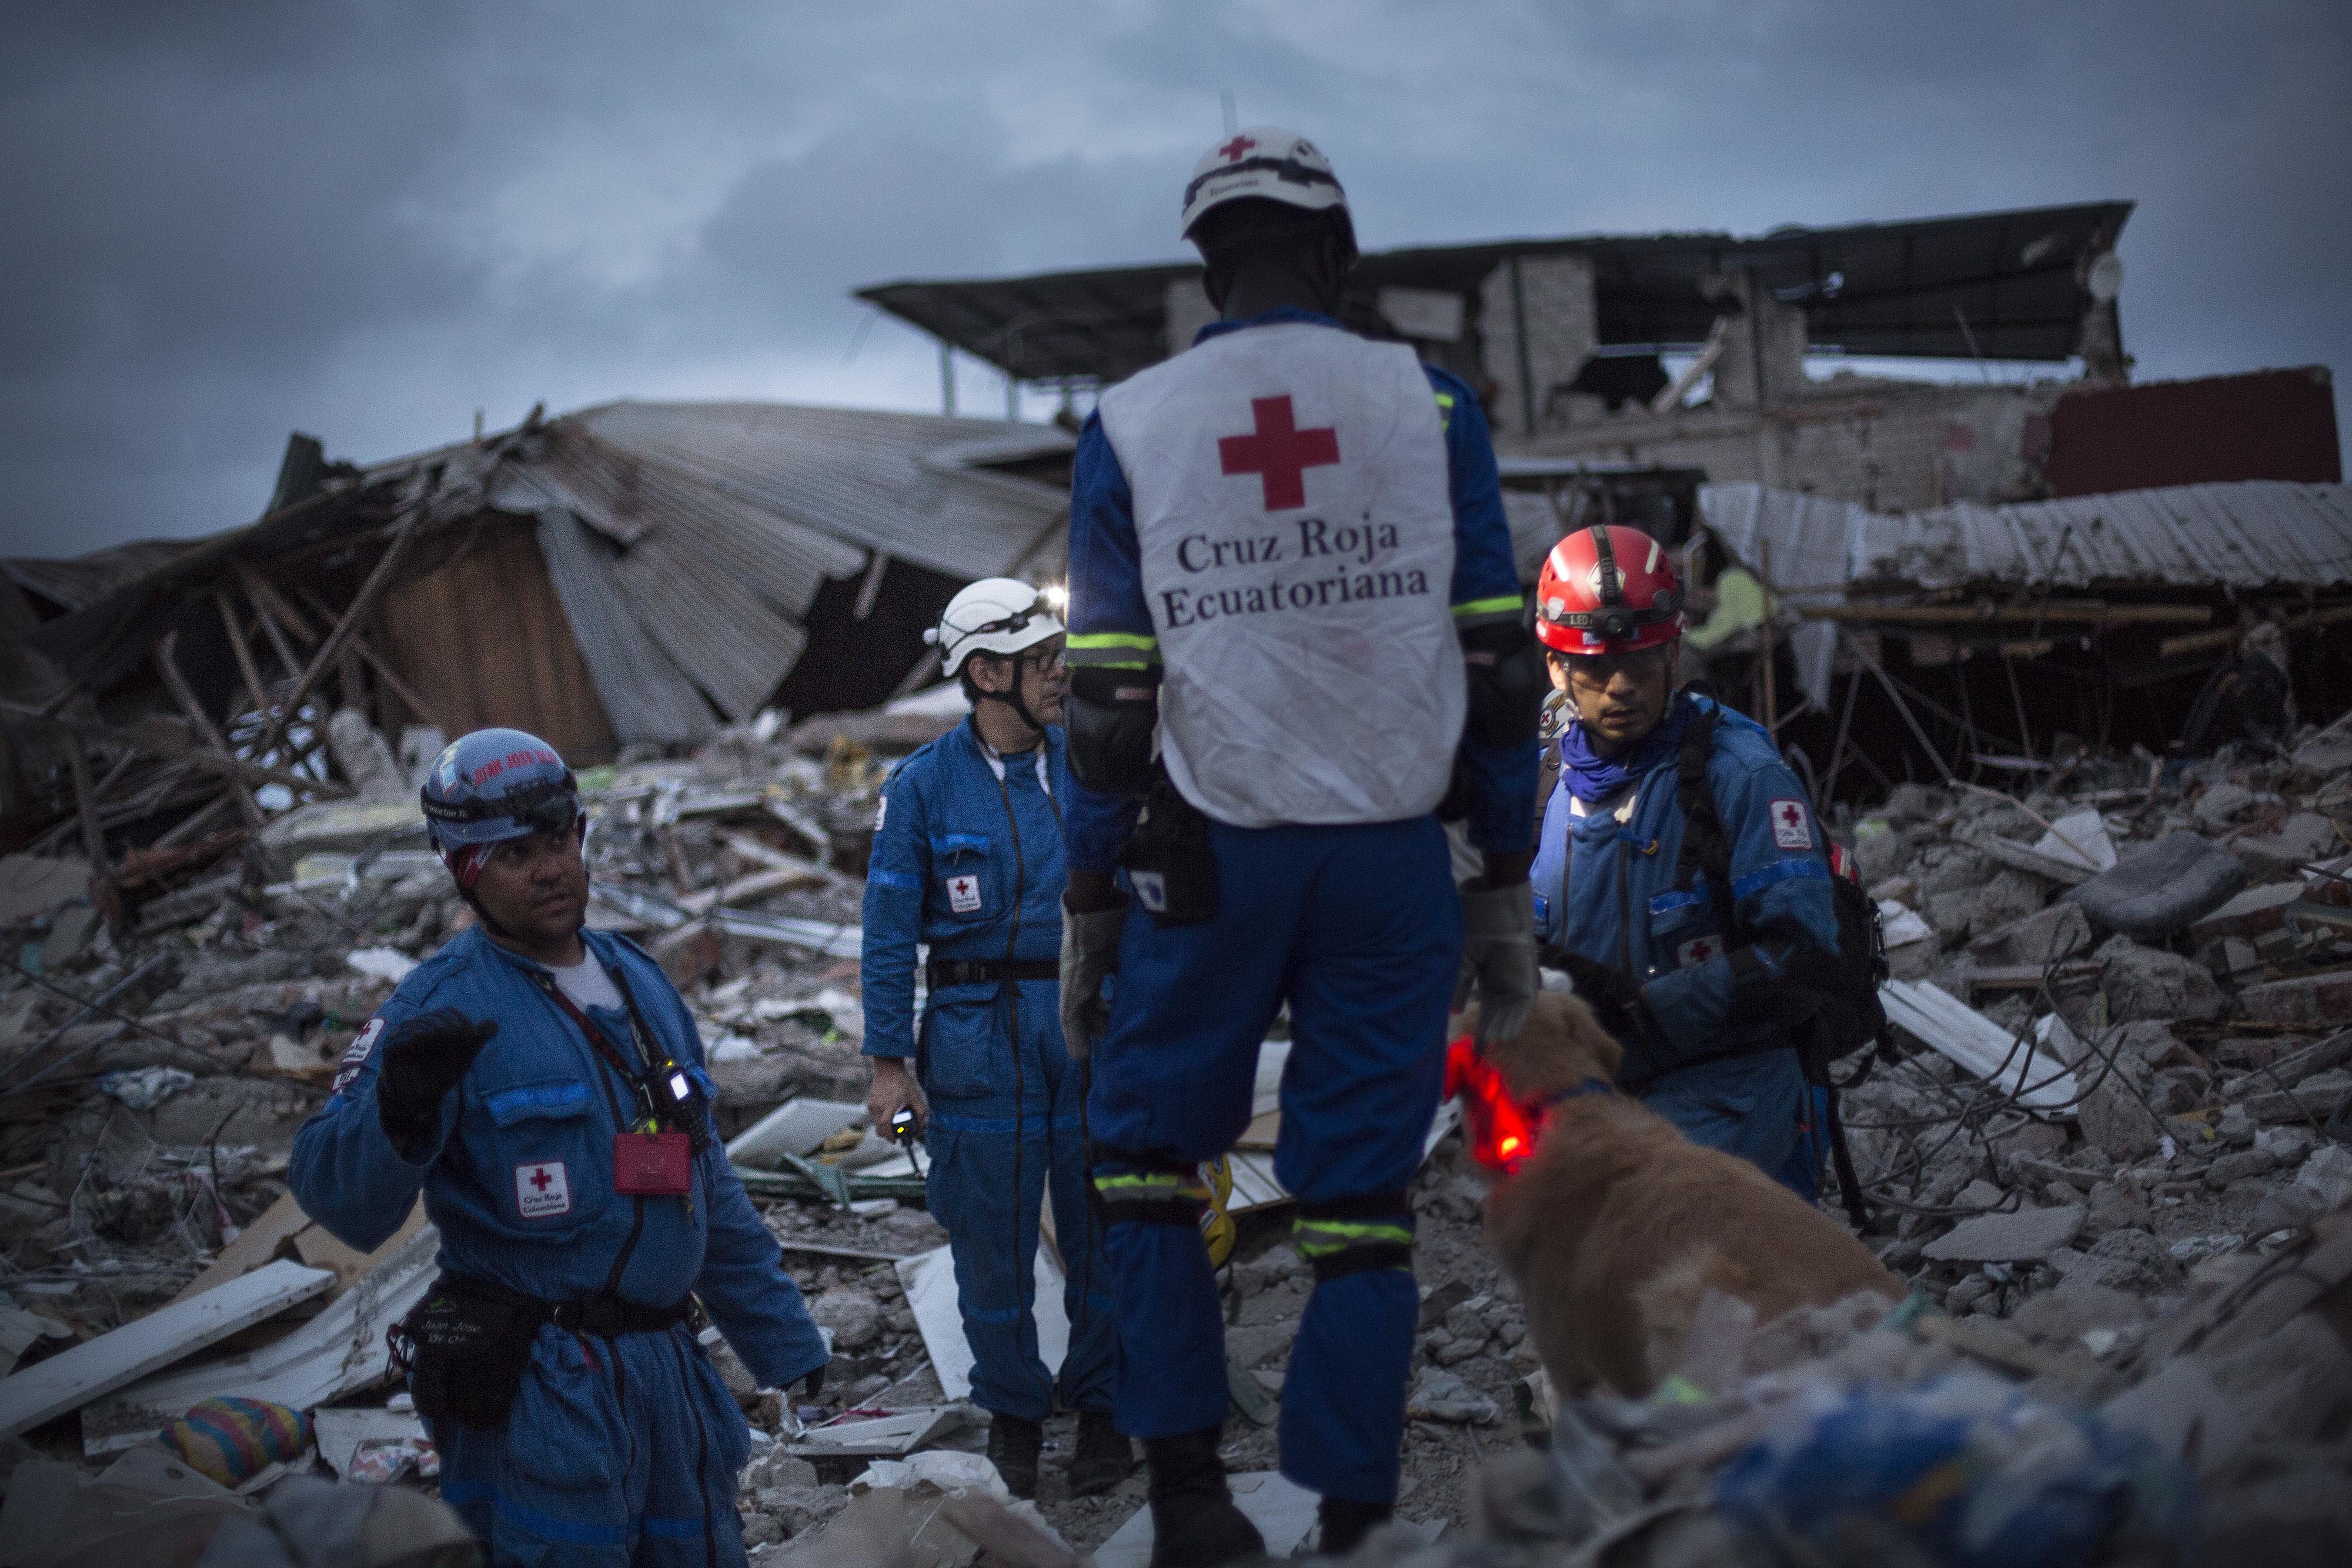 Rescue workers look for survivors after an earthquake struck in Pedernales, Ecuador, April 20, 2016. (Edu Leon—LatinContent/Getty Images)